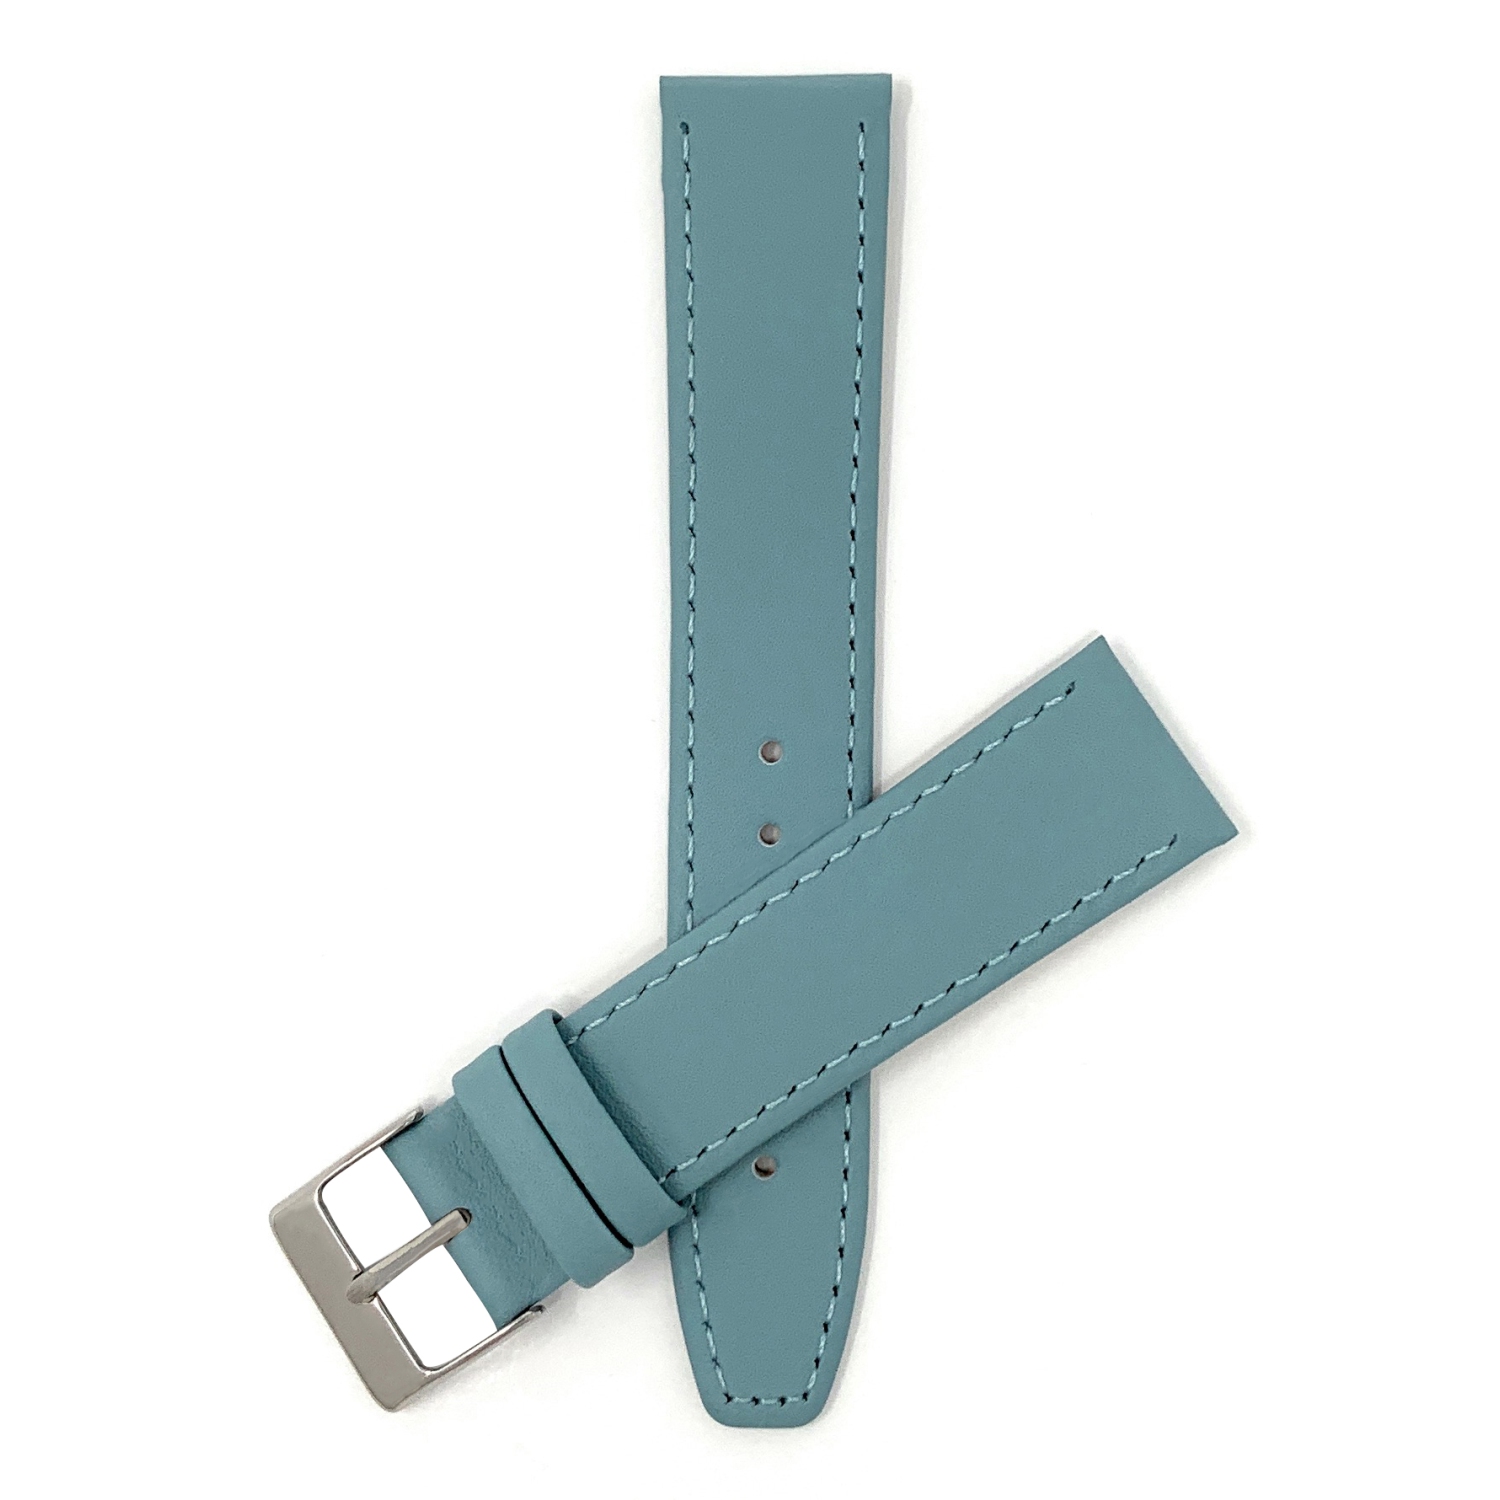 Bandini Classic Thin Leather Smart Watch Band Strap, Stitch For Samsung Galaxy Watch 46mm, Galaxy Watch 3 (45mm), Gear S3 Classic & Frontier - 22mm, Baby Blue / Silver Buckle